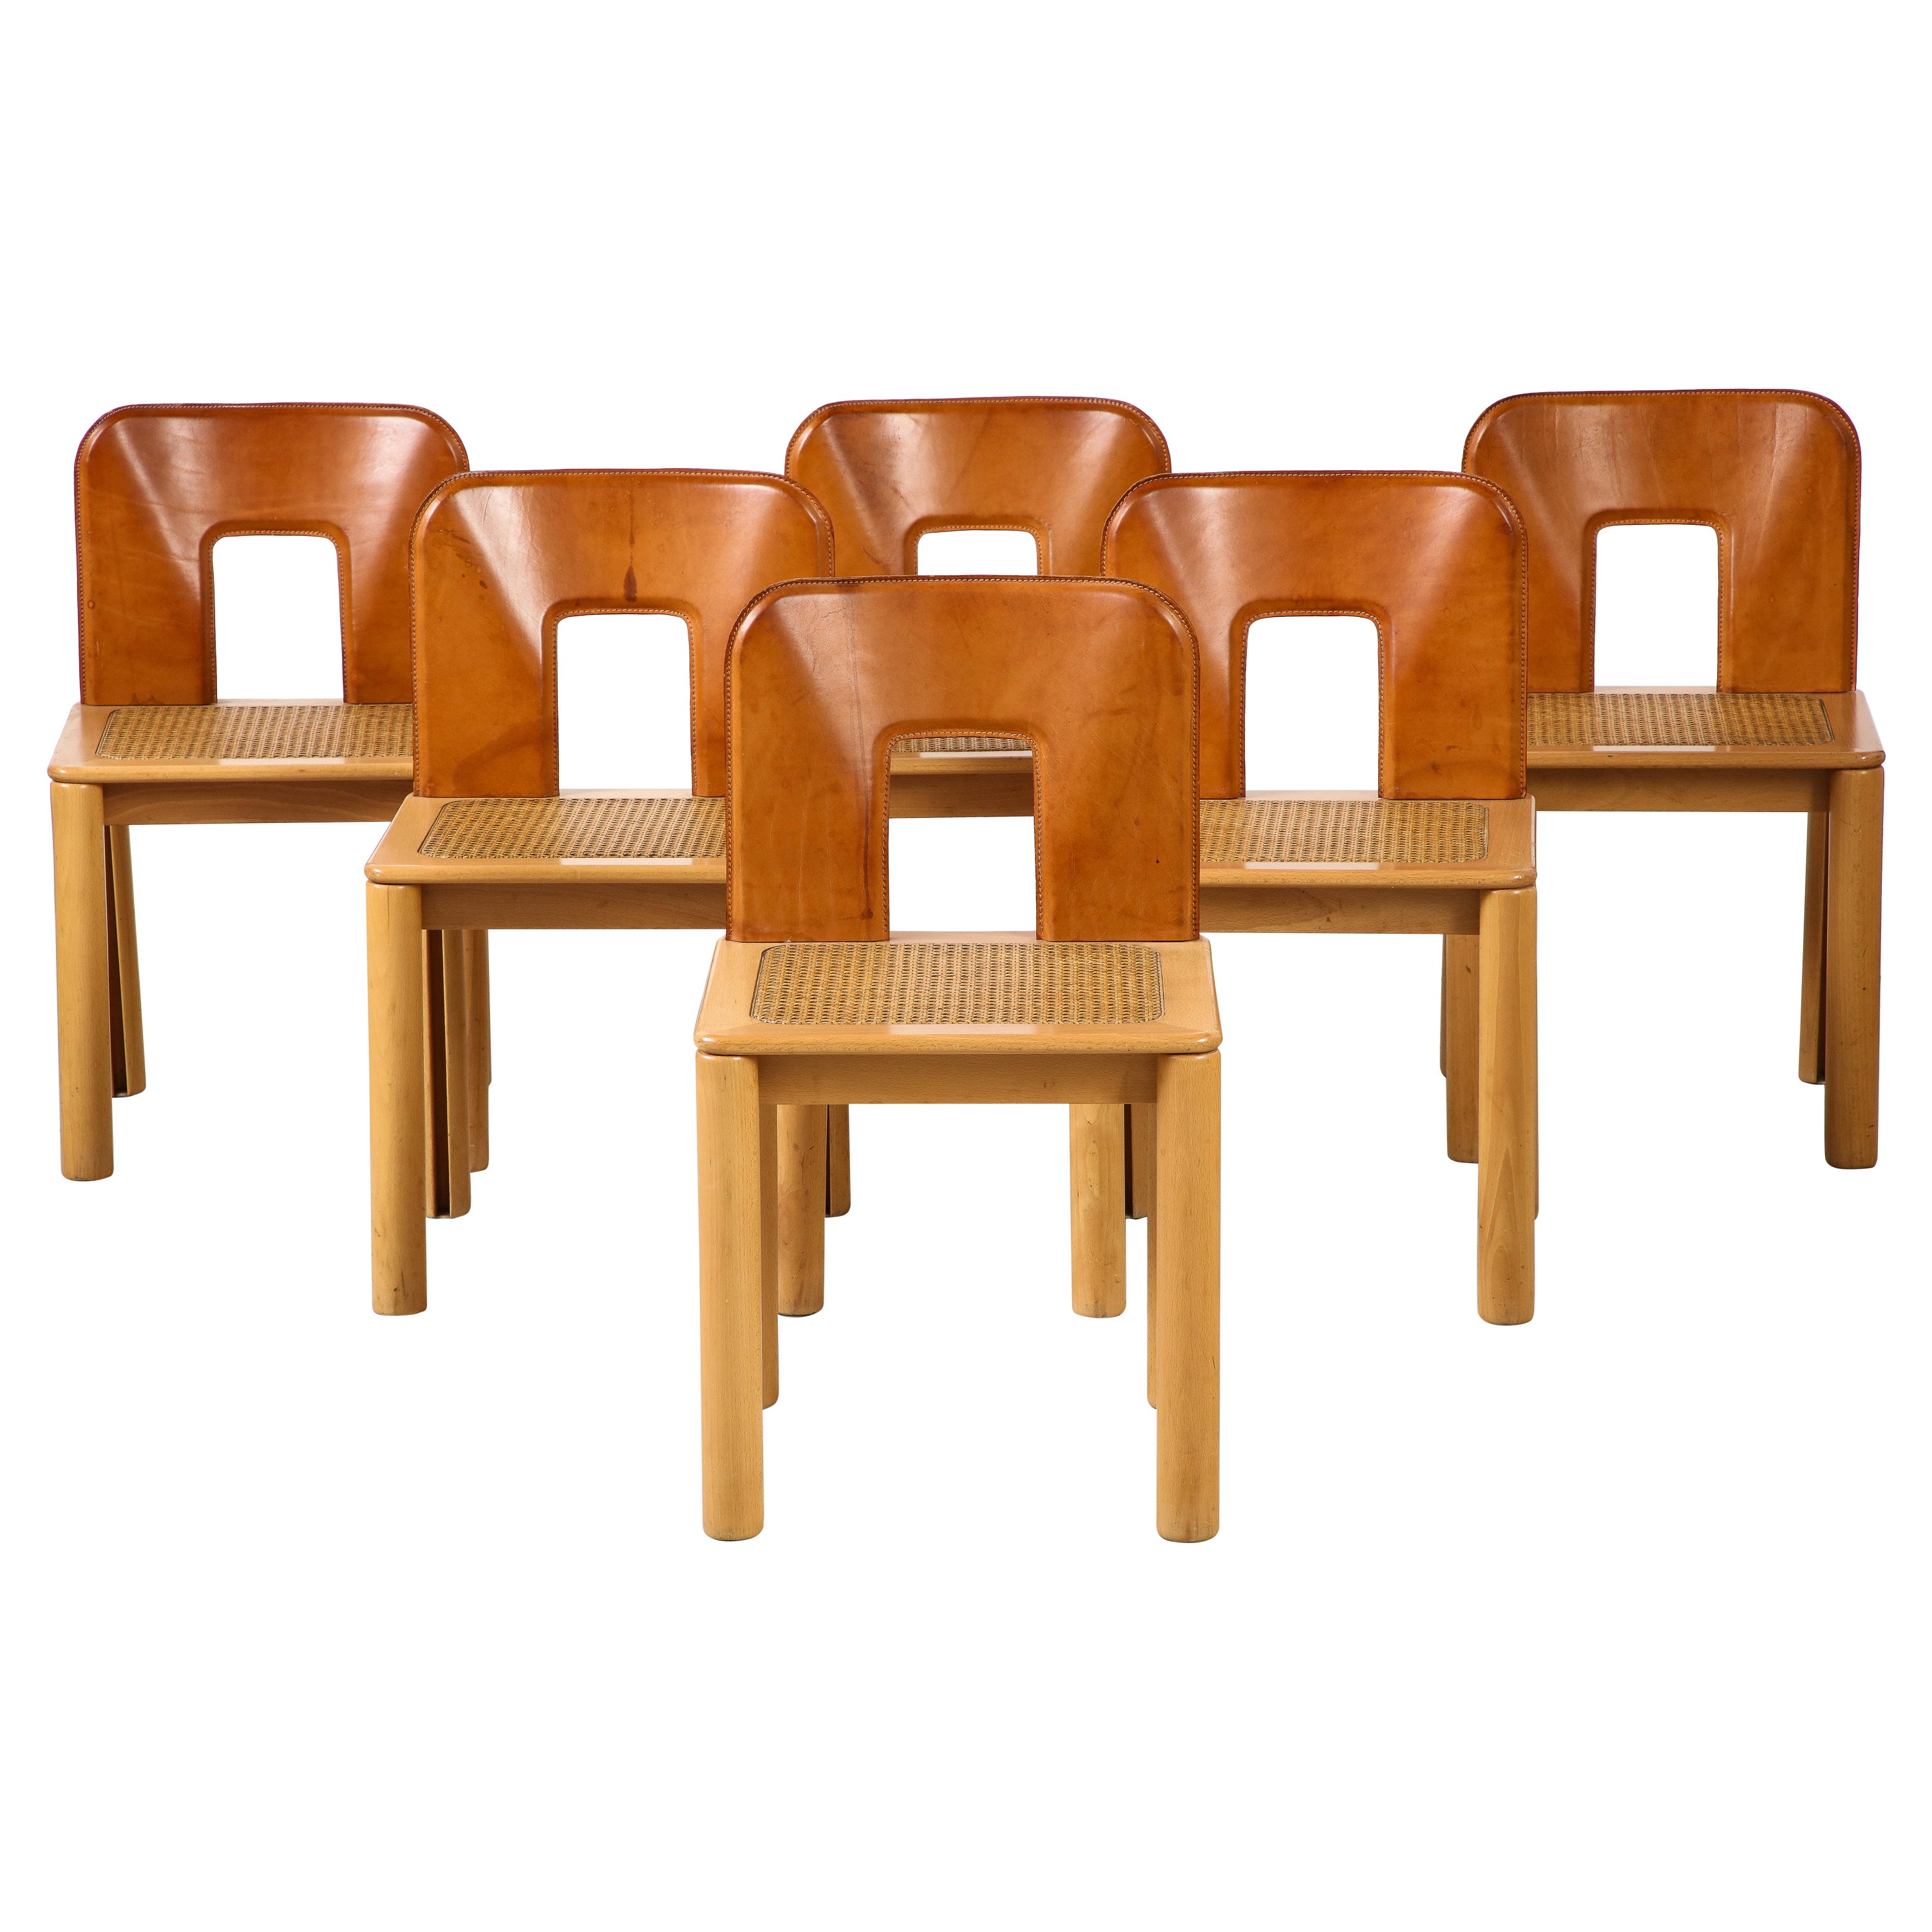 Italian 1970's Dining Chairs with Leather, Wood, Cane Seats, Italy, circa 1970 For Sale